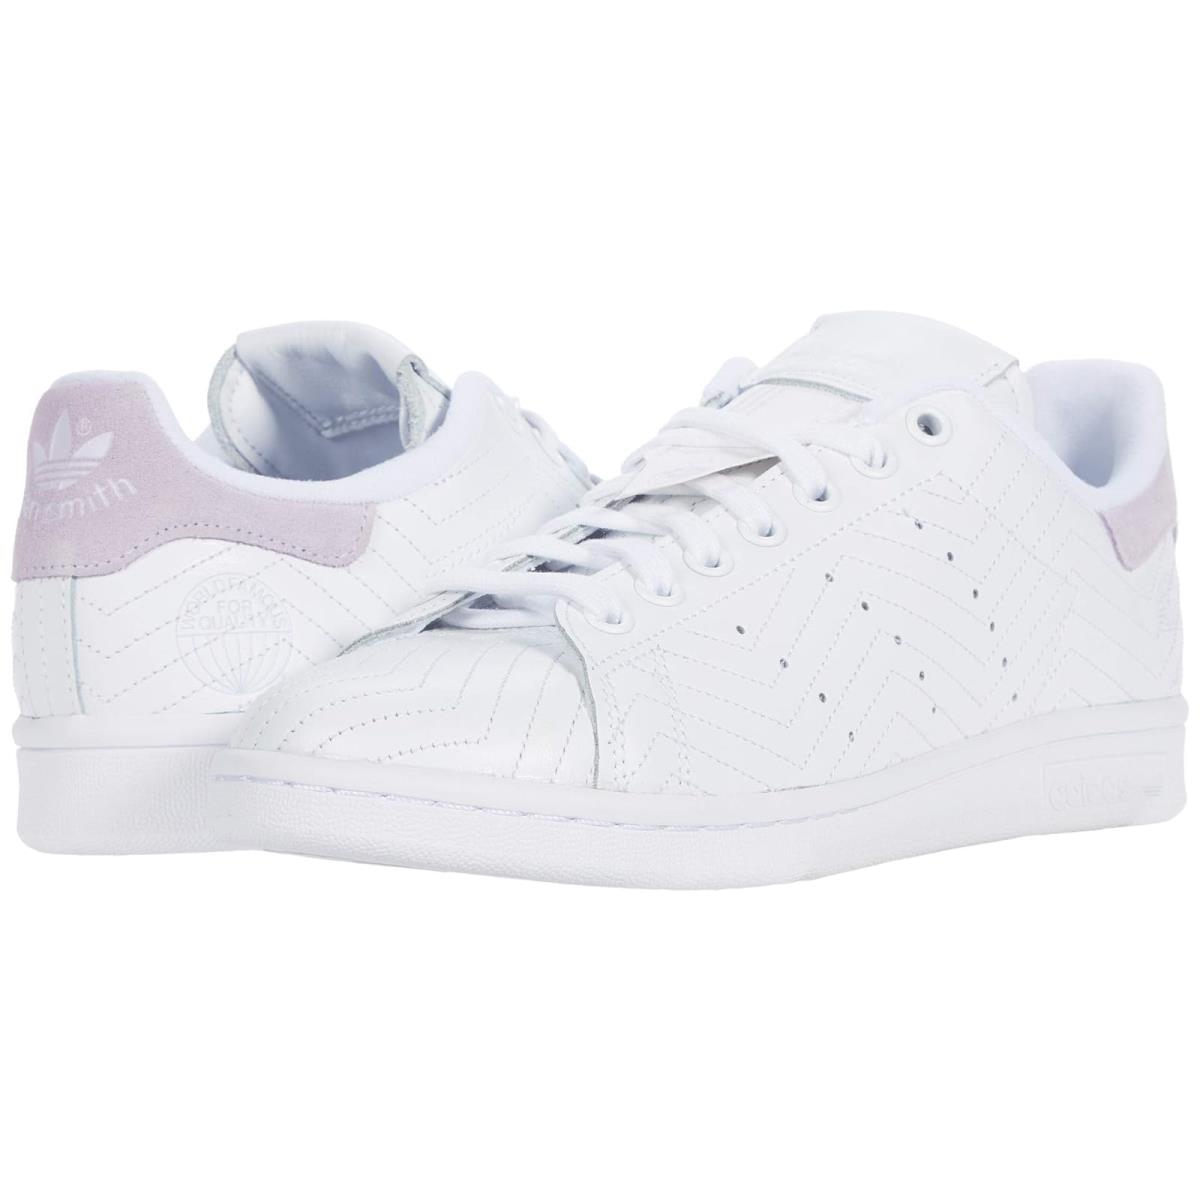 Woman`s Sneakers Athletic Shoes Adidas Originals Stan Smith W Footwear White/Footwear White/Purple Tint